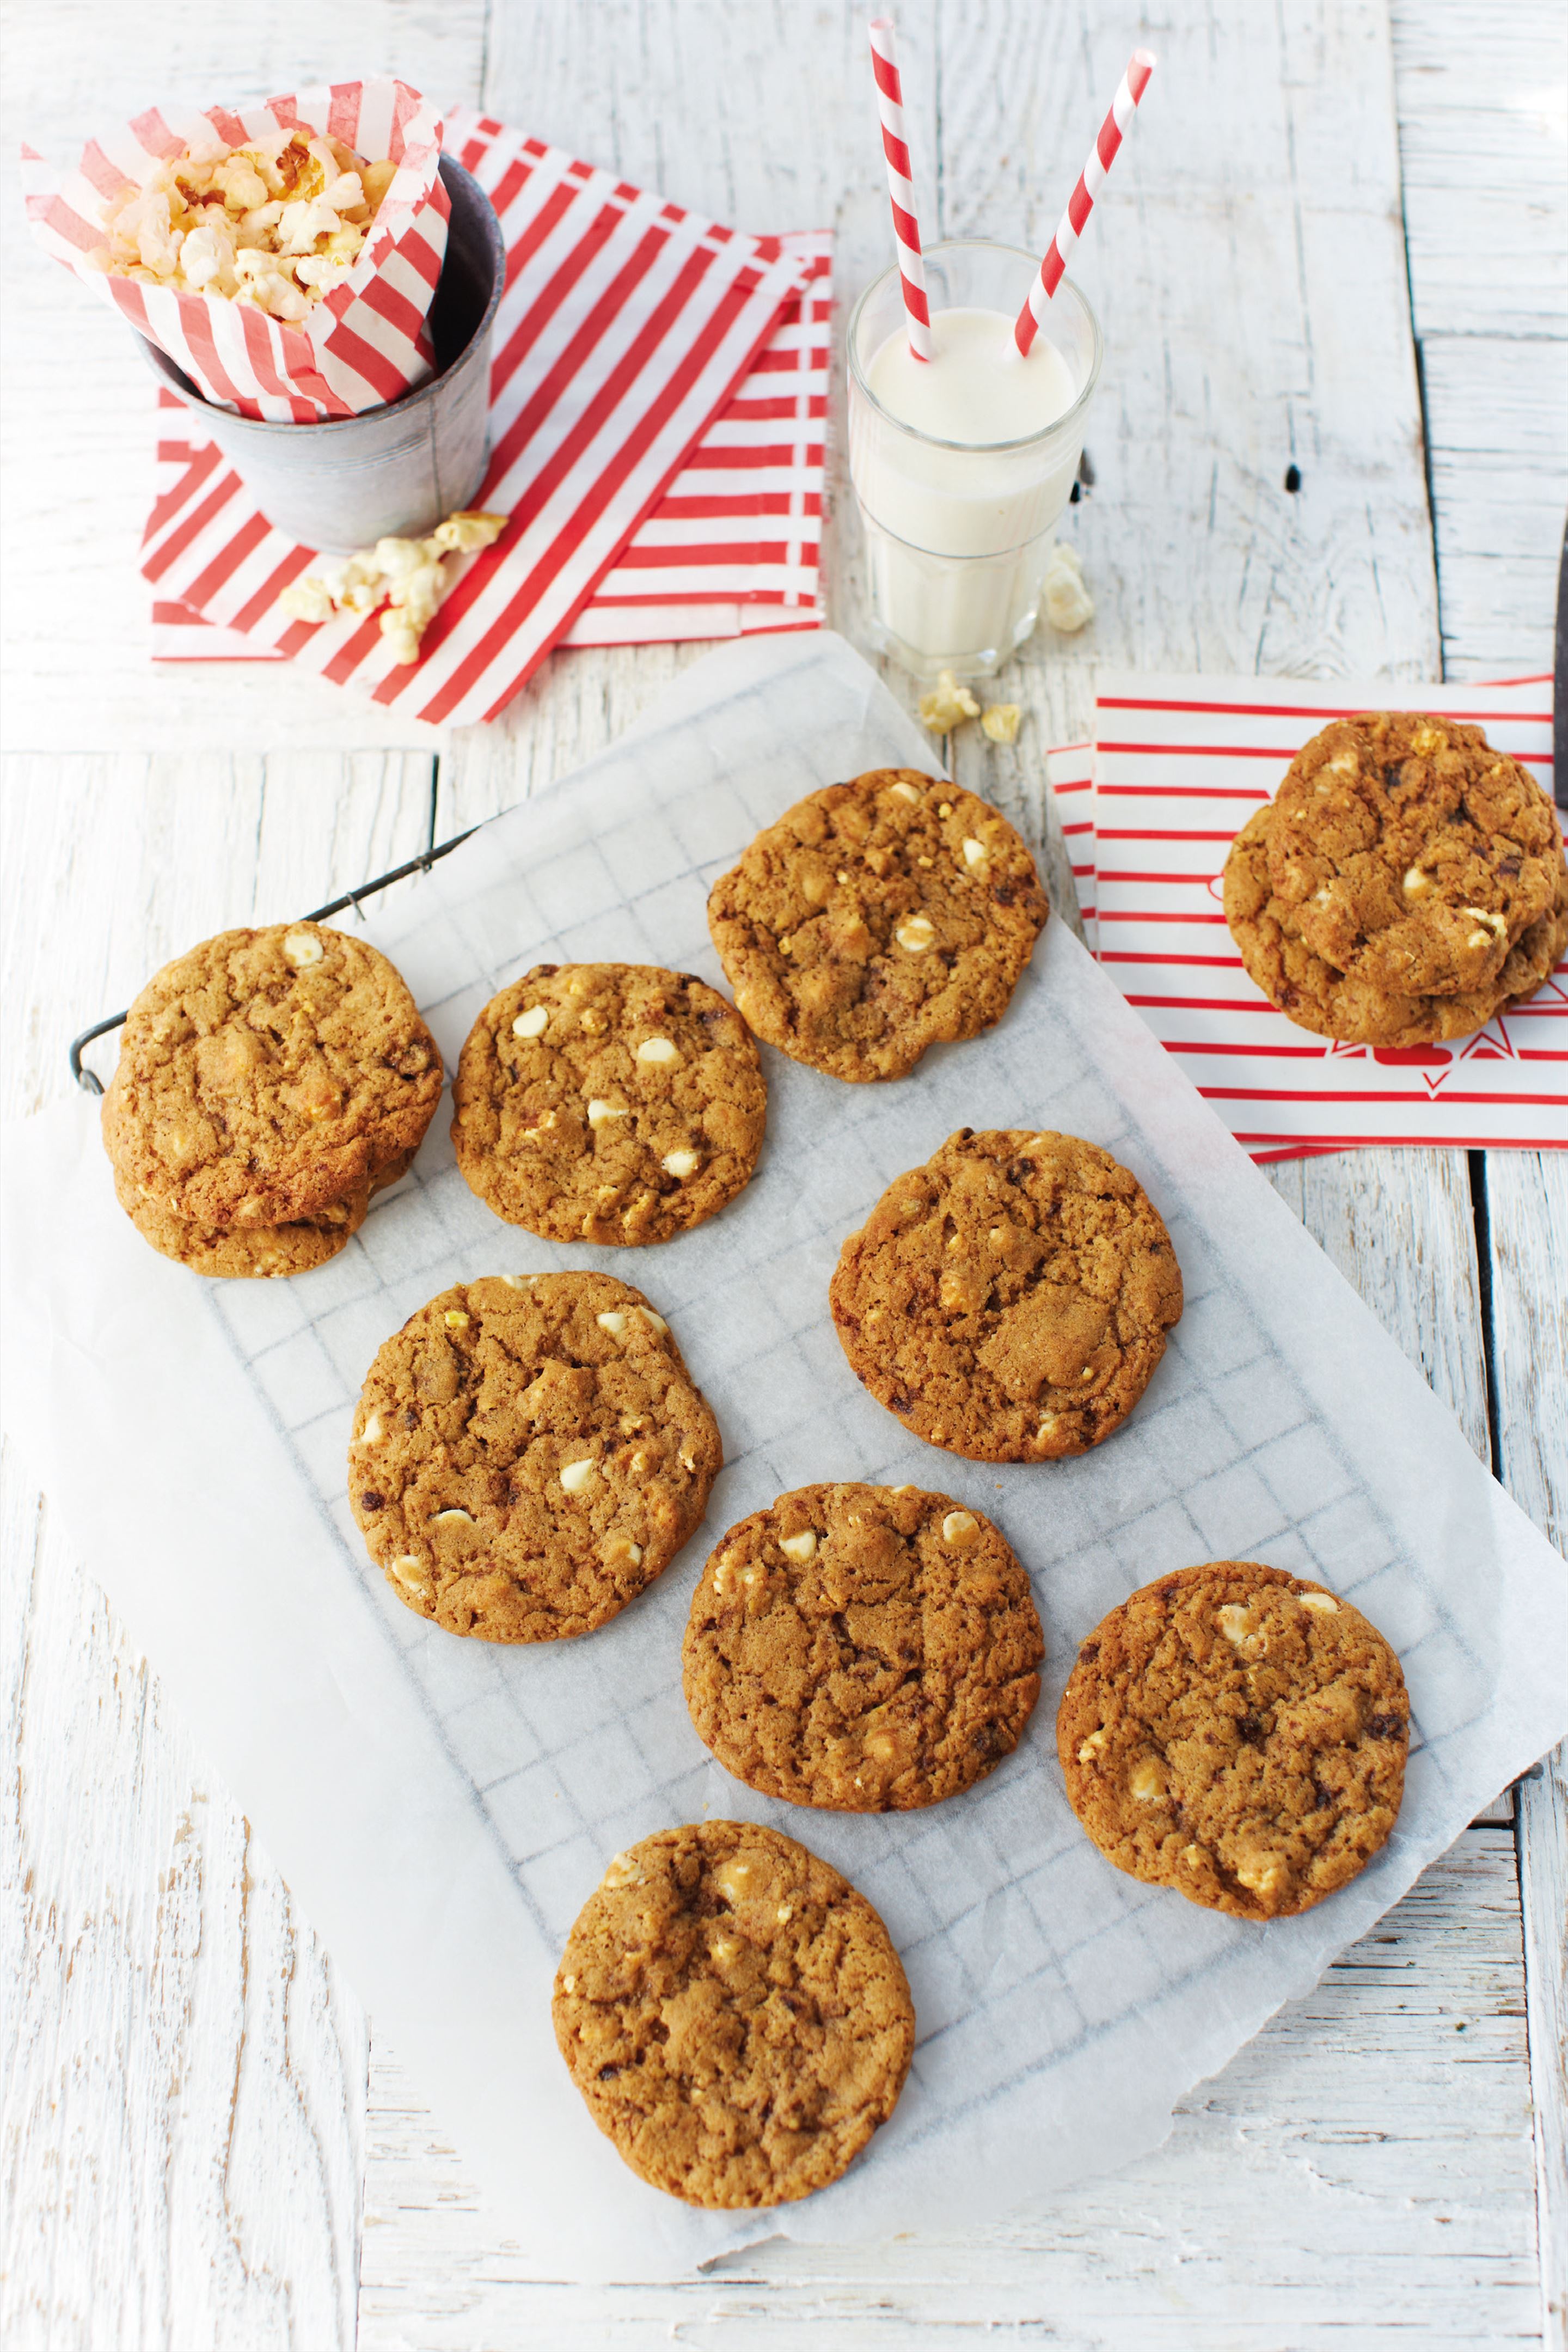 Popcorn and white chocolate all-American chewy cookies